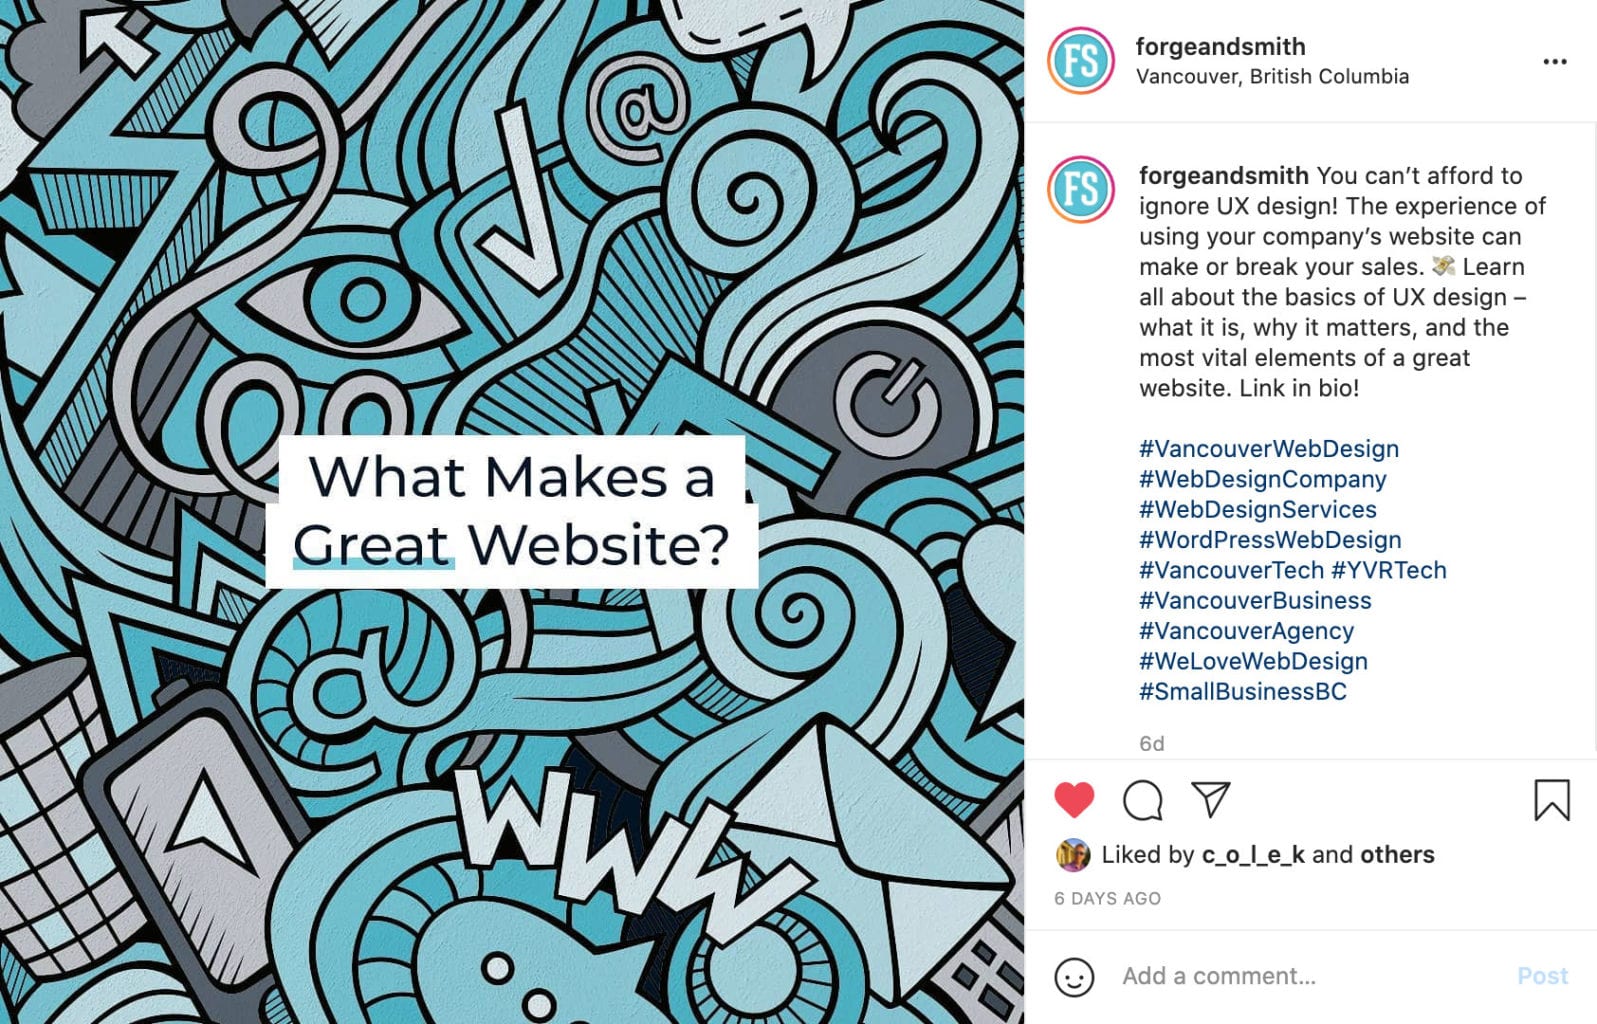 screenshot showing a forge and smith instagram post with hashtags about web design and vancouver